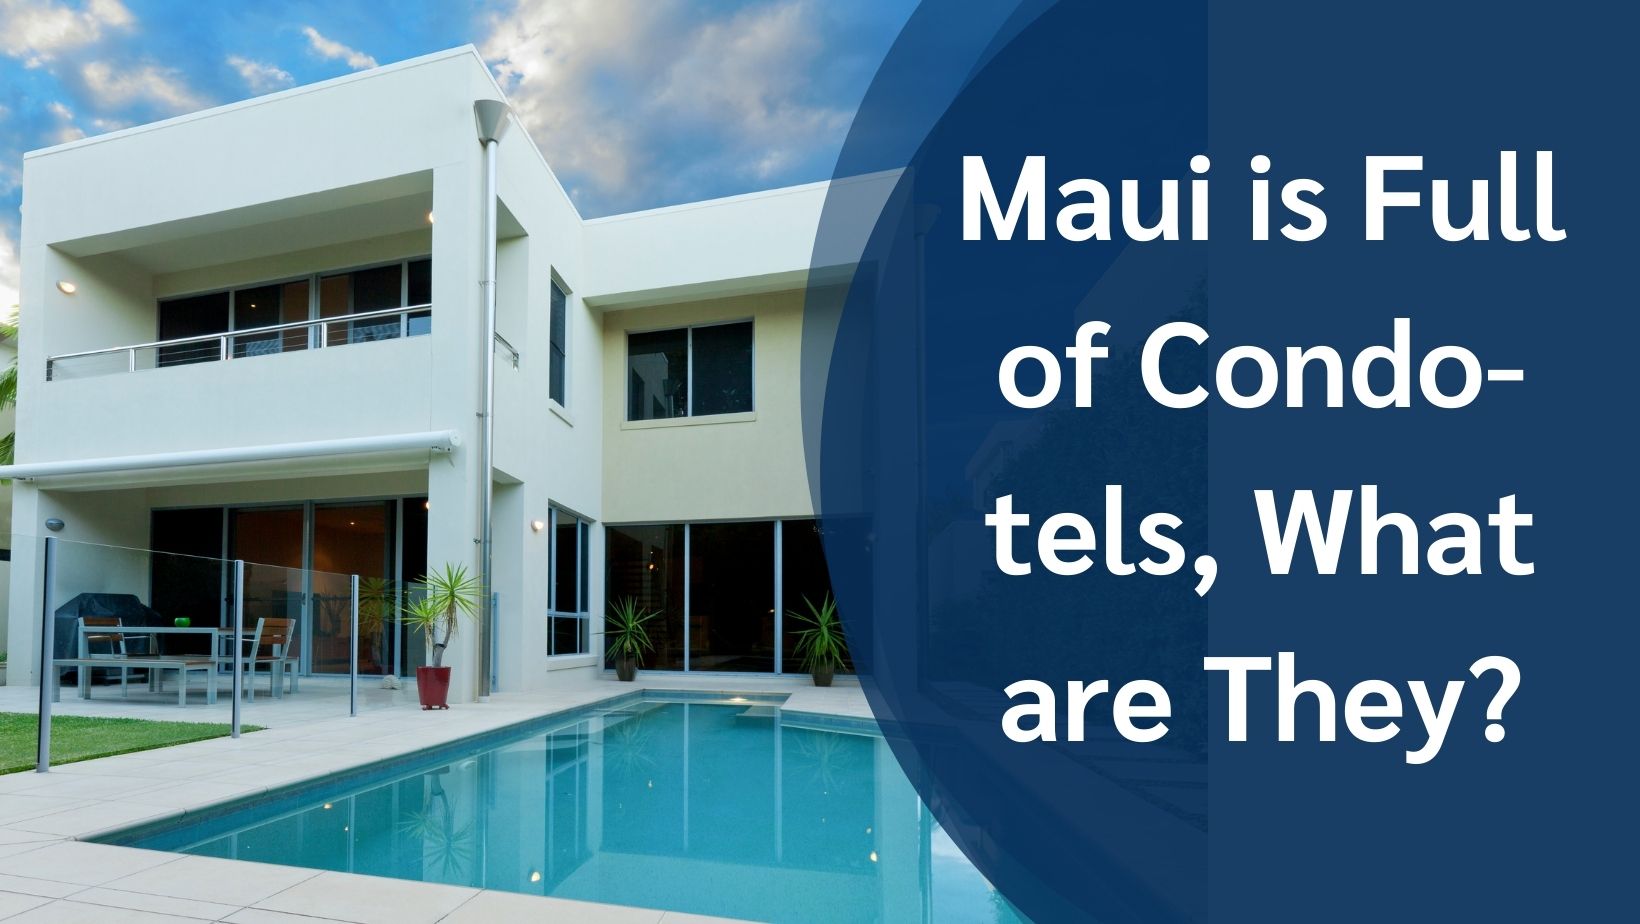 Maui is Full of Condo-tels, What are They?